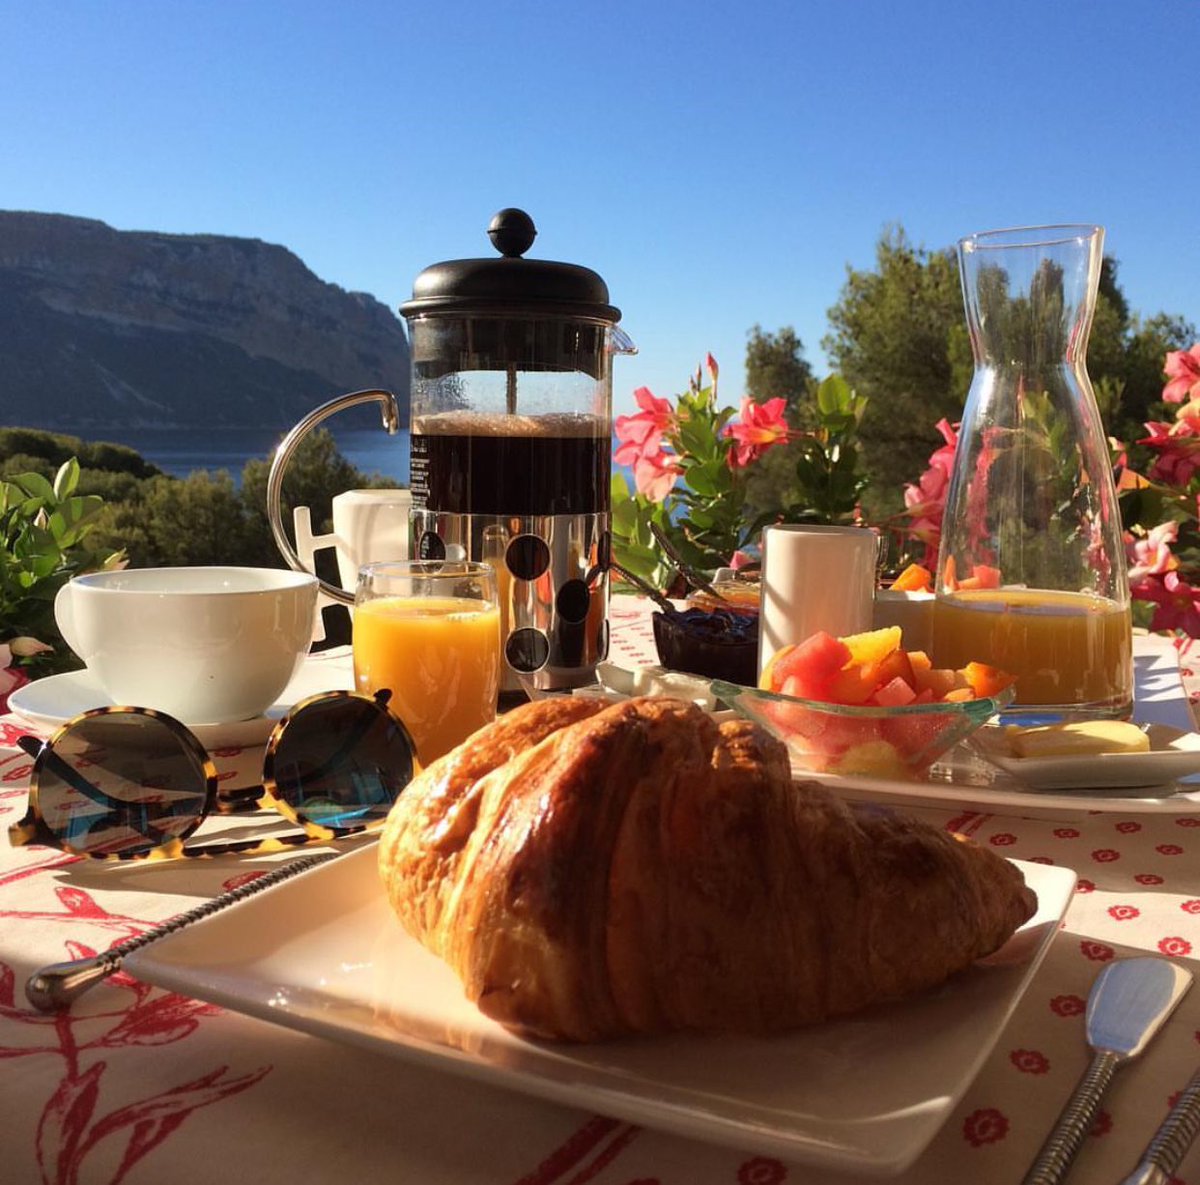 All for me. #bonjour #breakfast #instablogger #instatraveling #cassis #mystyle #mylook #france #see #theperfectbreakfast